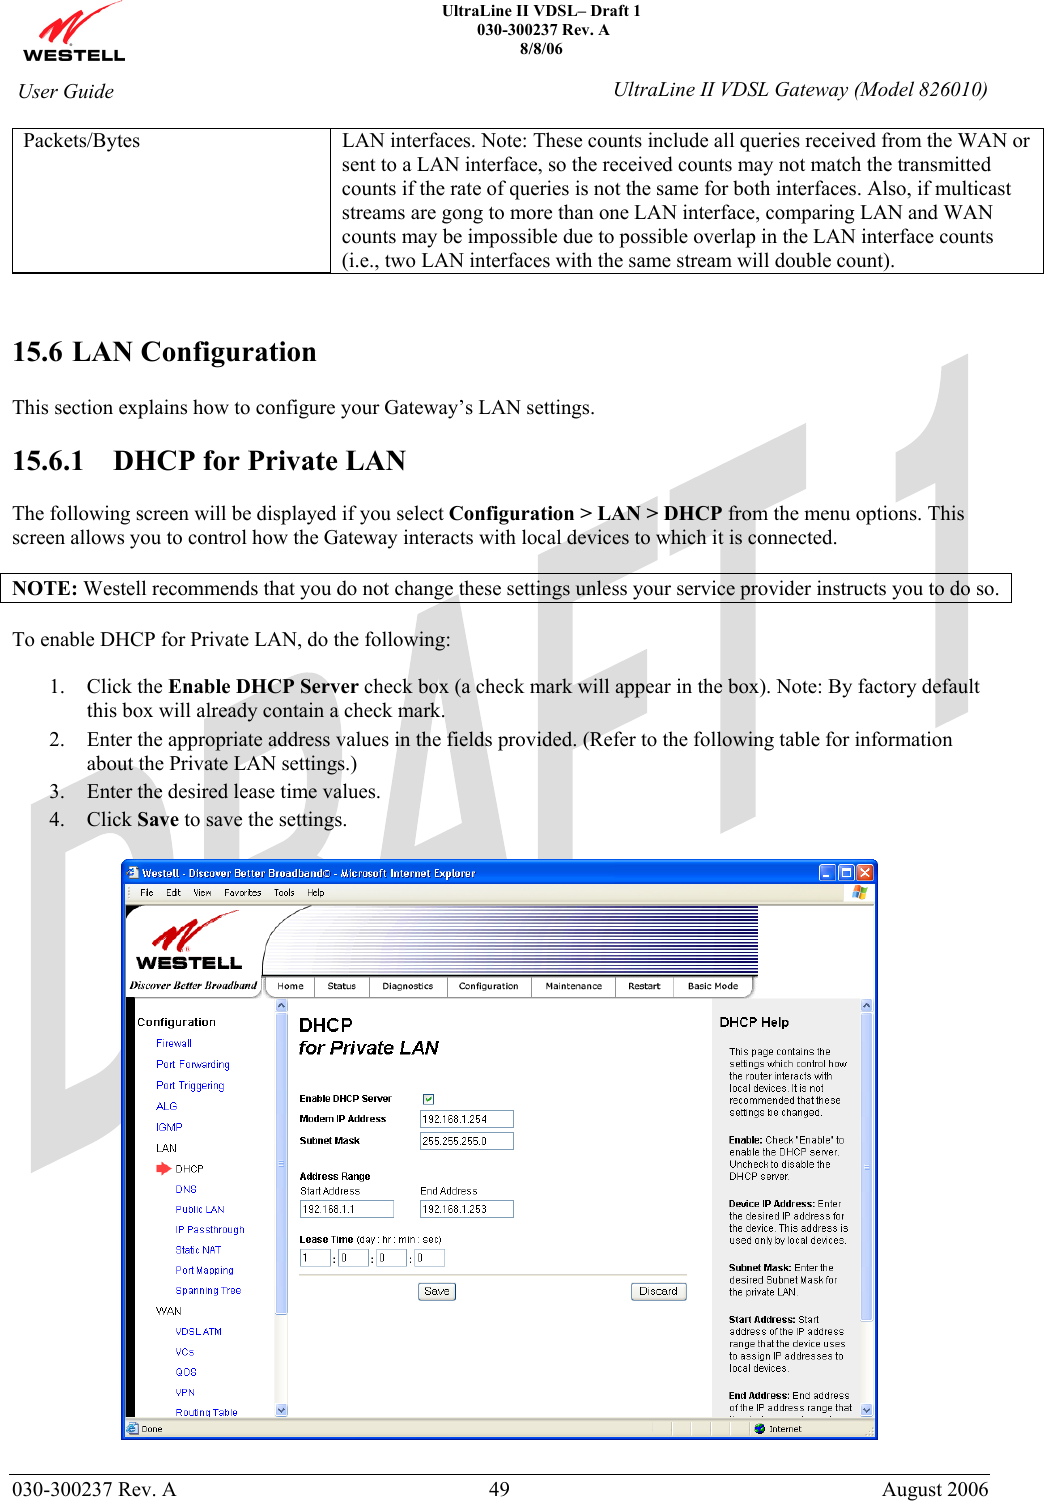    UltraLine II VDSL– Draft 1  030-300237 Rev. A 8/8/06   030-300237 Rev. A  49  August 2006  User Guide  UltraLine II VDSL Gateway (Model 826010) Packets/Bytes LAN interfaces. Note: These counts include all queries received from the WAN or sent to a LAN interface, so the received counts may not match the transmitted counts if the rate of queries is not the same for both interfaces. Also, if multicast streams are gong to more than one LAN interface, comparing LAN and WAN counts may be impossible due to possible overlap in the LAN interface counts (i.e., two LAN interfaces with the same stream will double count).   15.6 LAN Configuration  This section explains how to configure your Gateway’s LAN settings.  15.6.1  DHCP for Private LAN  The following screen will be displayed if you select Configuration &gt; LAN &gt; DHCP from the menu options. This screen allows you to control how the Gateway interacts with local devices to which it is connected.  NOTE: Westell recommends that you do not change these settings unless your service provider instructs you to do so.  To enable DHCP for Private LAN, do the following:  1. Click the Enable DHCP Server check box (a check mark will appear in the box). Note: By factory default this box will already contain a check mark. 2. Enter the appropriate address values in the fields provided. (Refer to the following table for information about the Private LAN settings.) 3. Enter the desired lease time values. 4. Click Save to save the settings.    